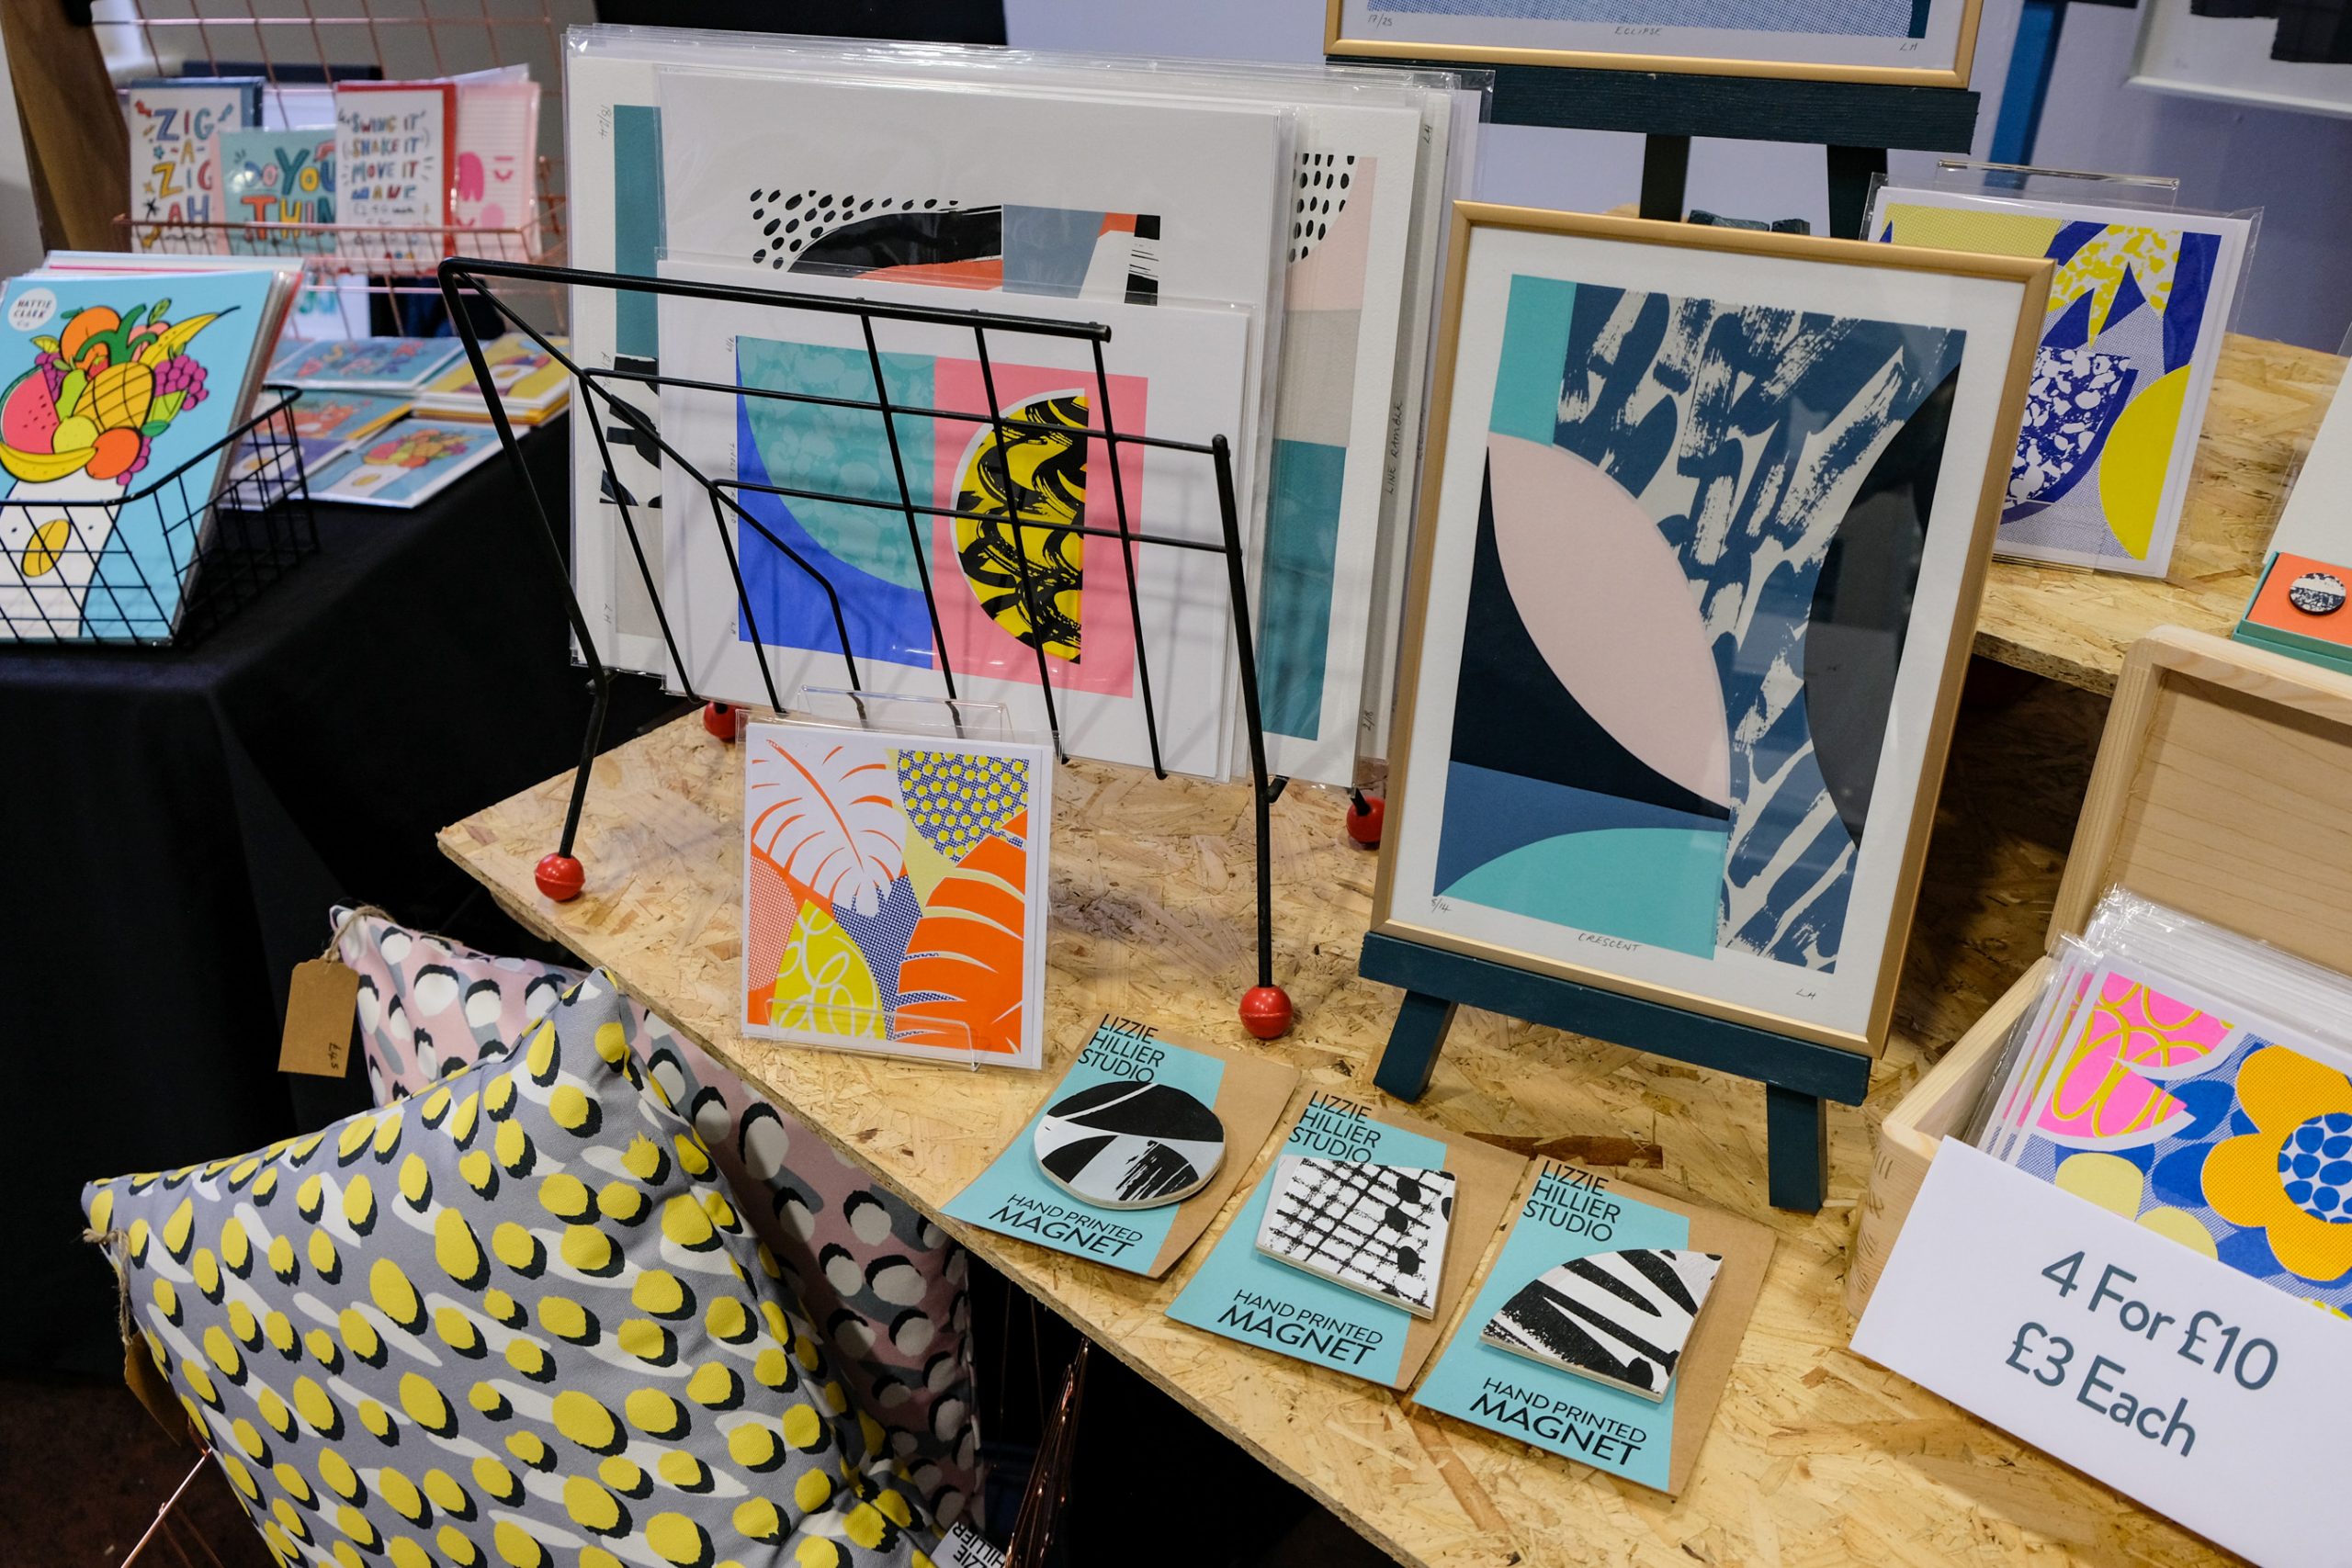 Lizzie Hillier at Liverpool Print Fair in April 2019